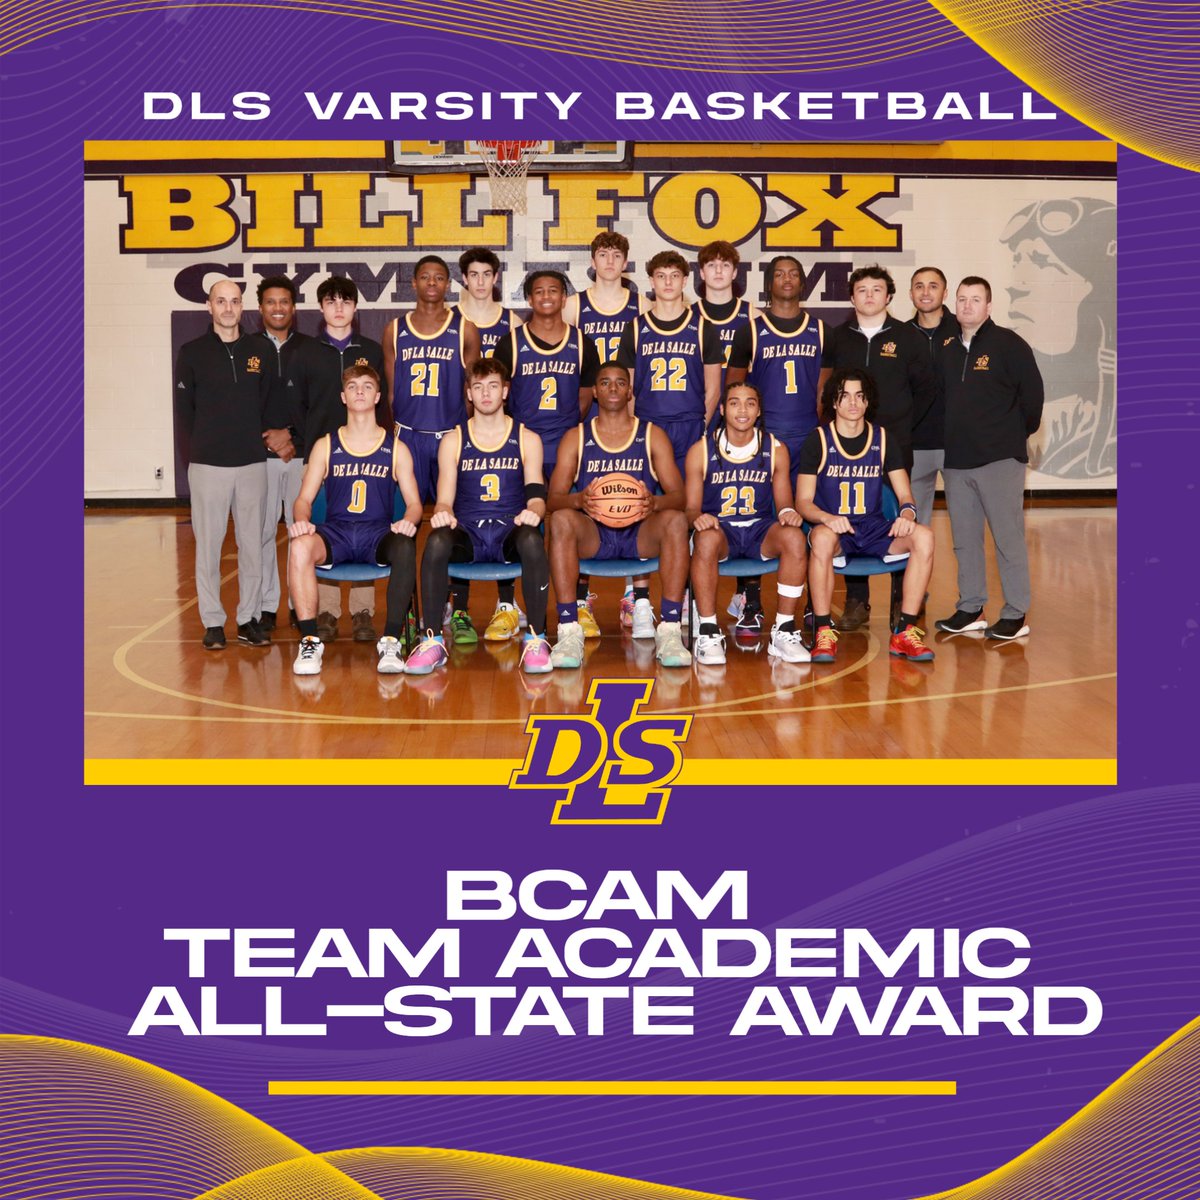 Congratulations to the DLS Varsity Basketball team and their very deserving honor of earning the Basketball Coaches Association of Michigan Team Academic All-State Award! Great job, Pilots! #PilotPride